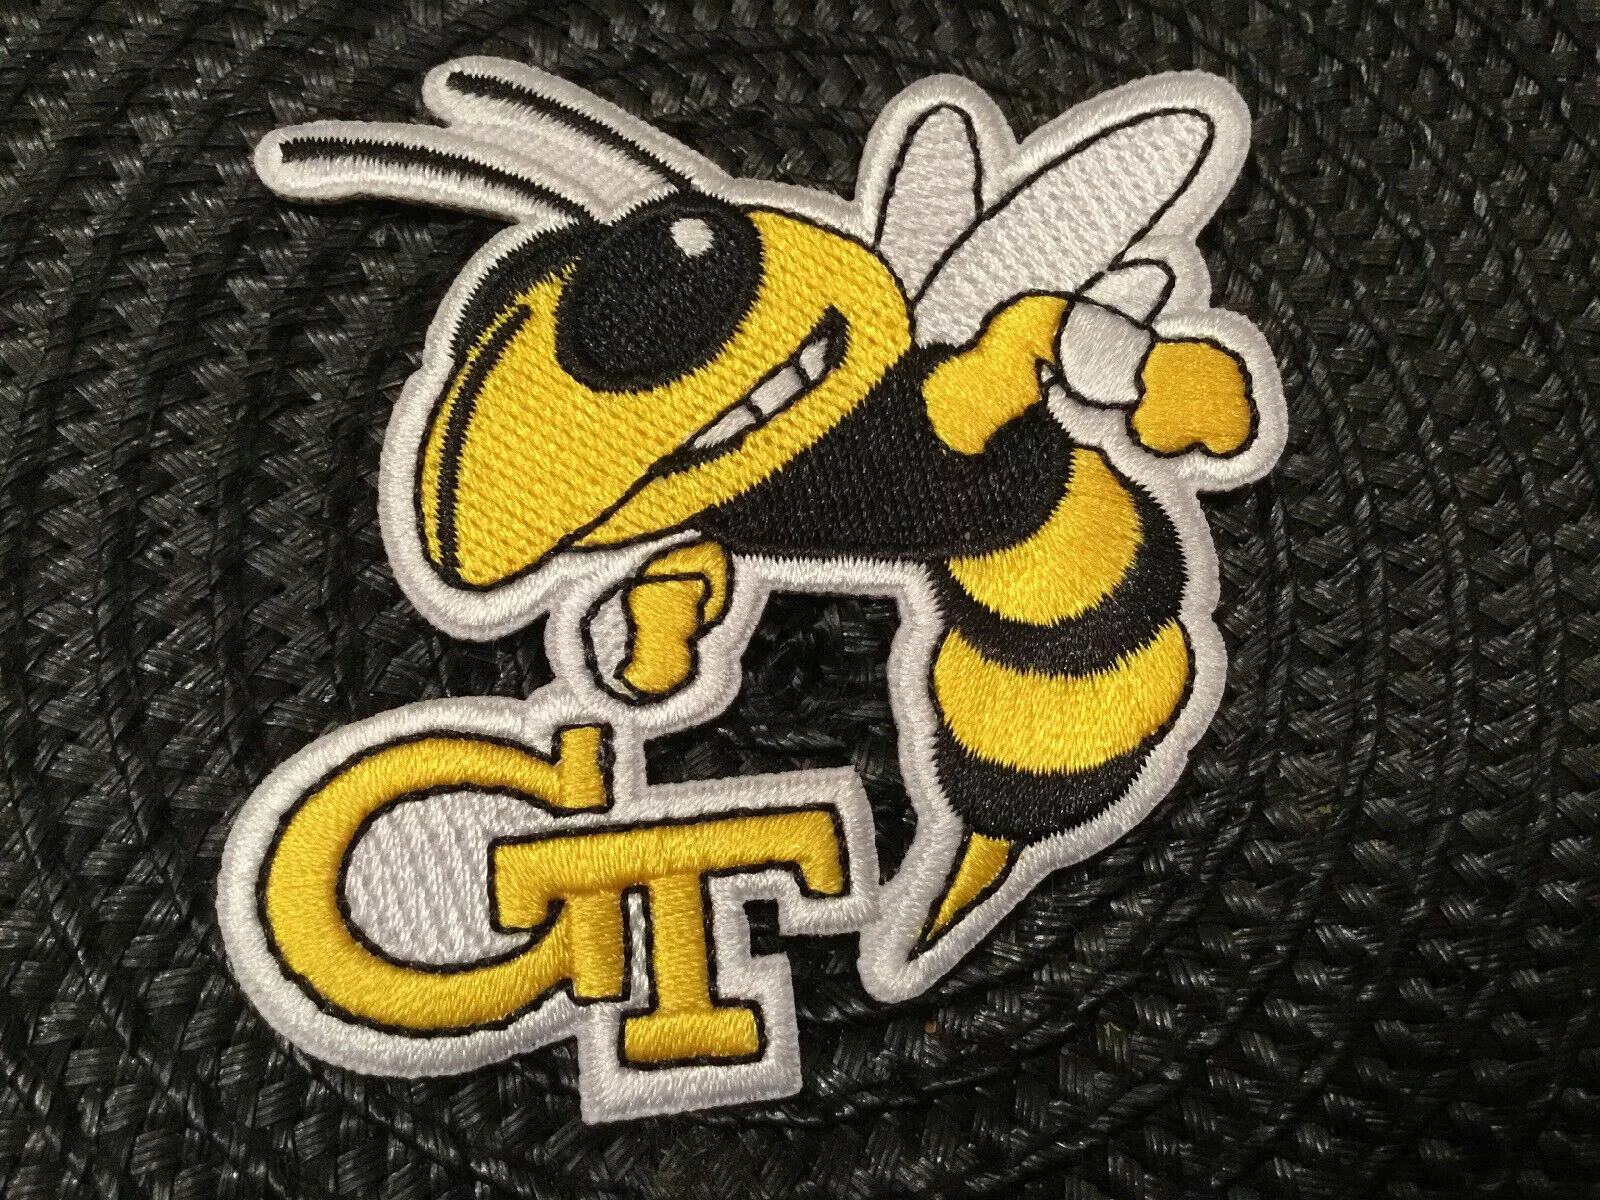 GT Georgia Tech Yellow Jackets Vintage Embroidered Iron On Patch 2.75 X 2.5”